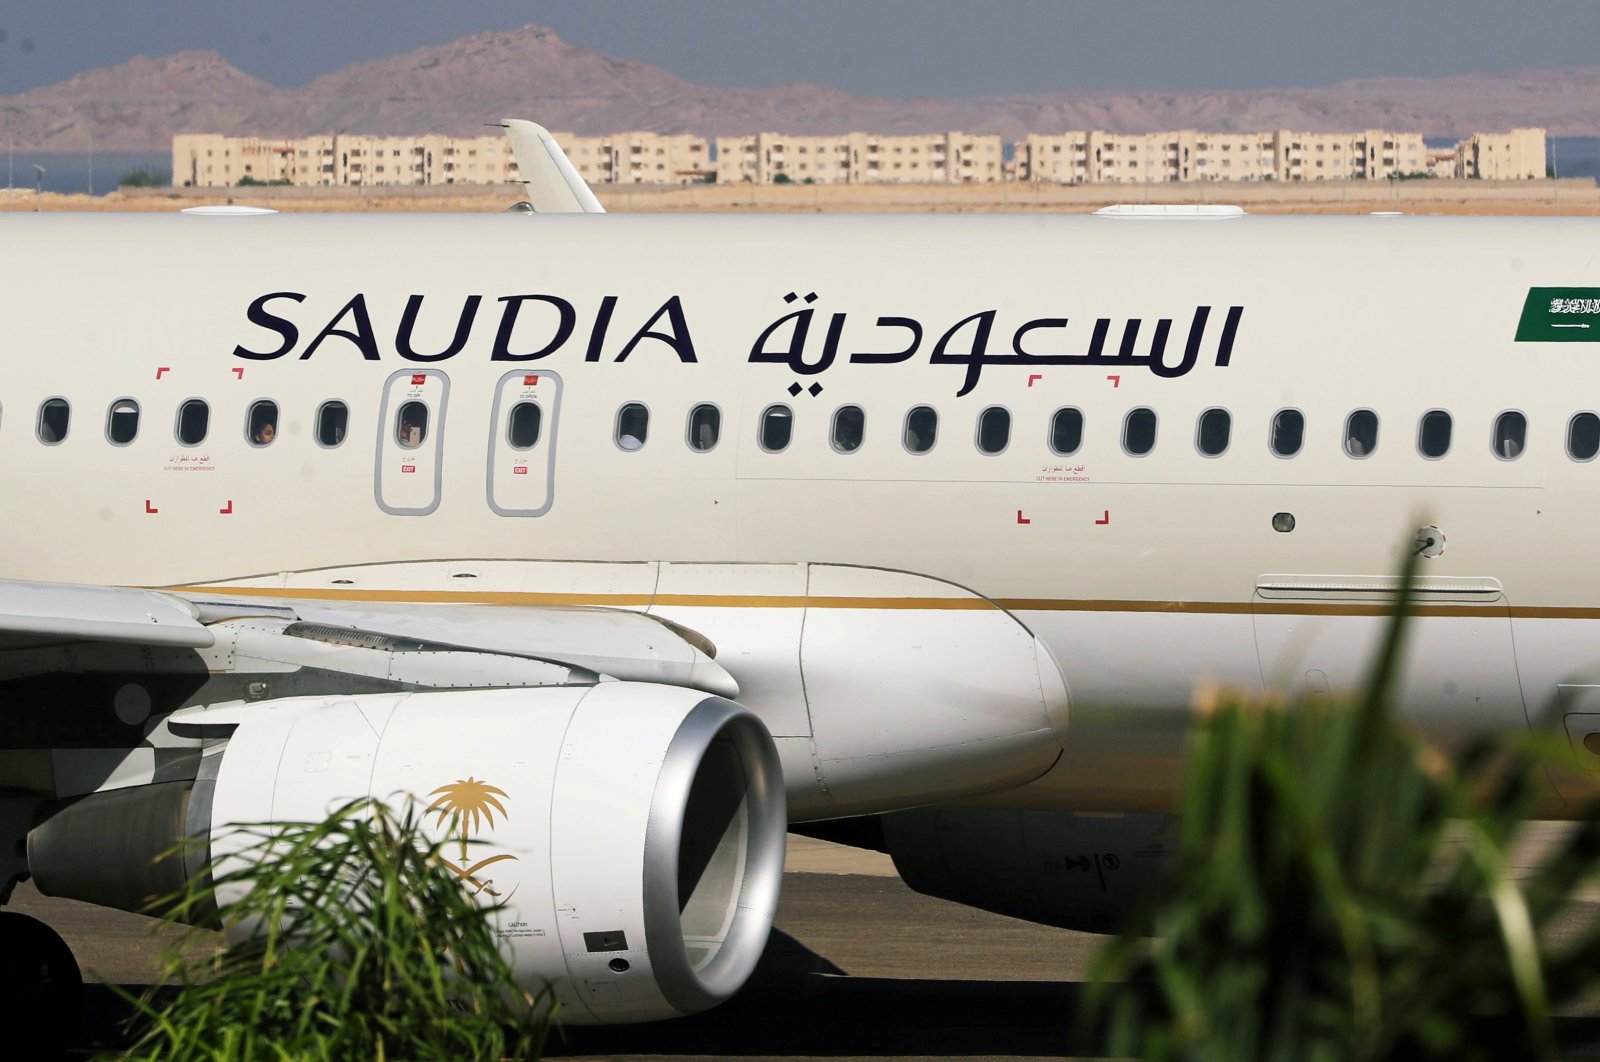 Saudi Arabian Airlines plane, is seen at the airport of the Red Sea resort of Sharm el-Sheikh, Egypt, Aug.9, 2021. (Reuters File Photo)